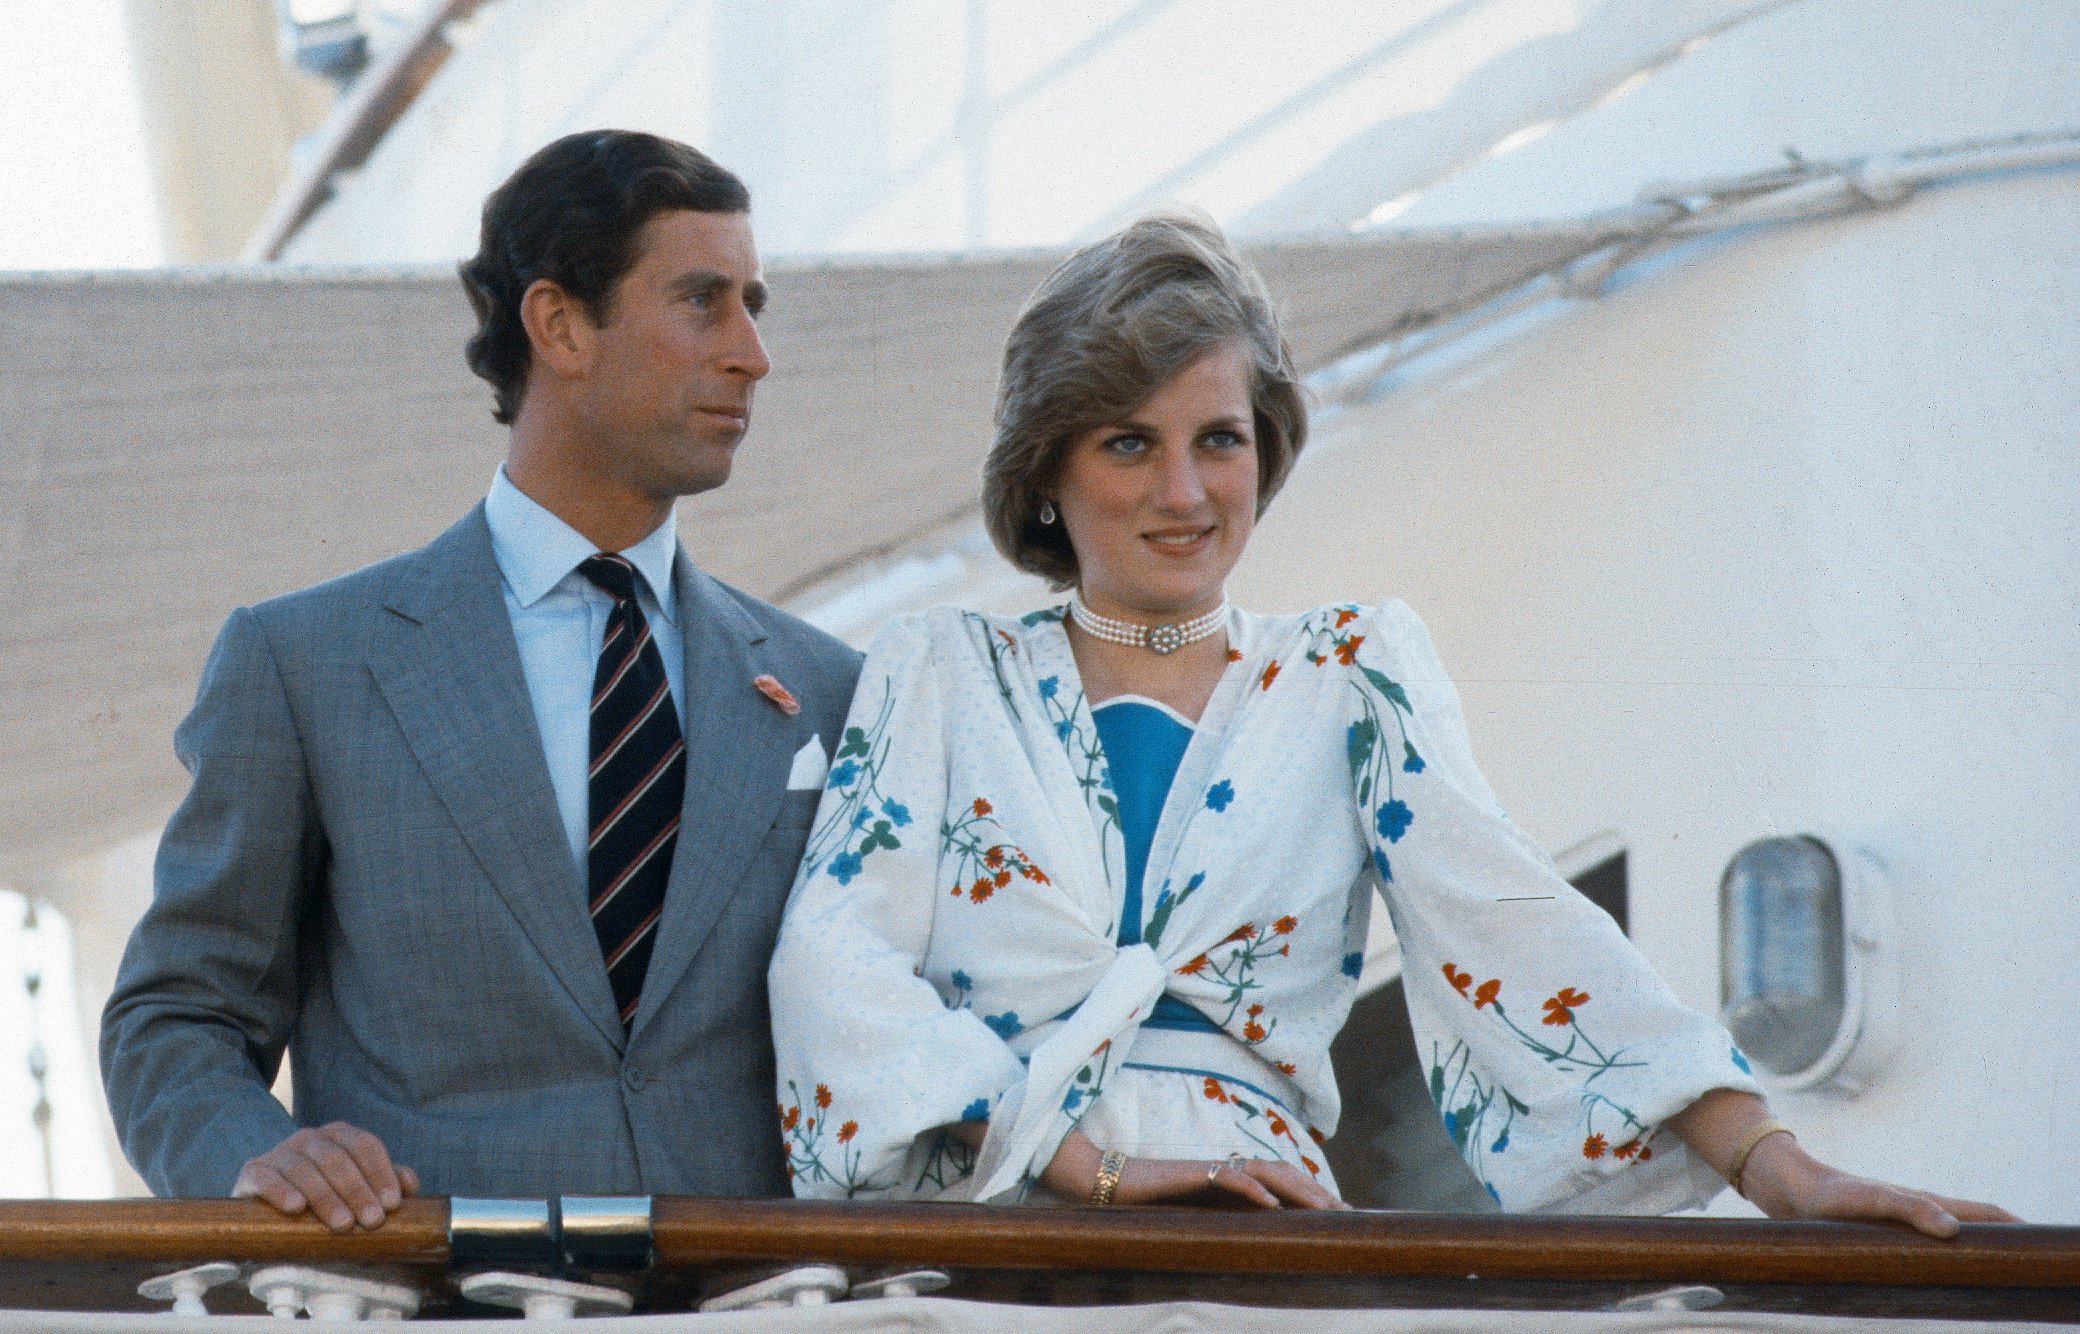 Prince Charles and Princess Diana, who destroyed his watercolor paintings on their honeymoon, onboard the Royal yacht Britannia as they prepare to depart on their honeymoon cruise